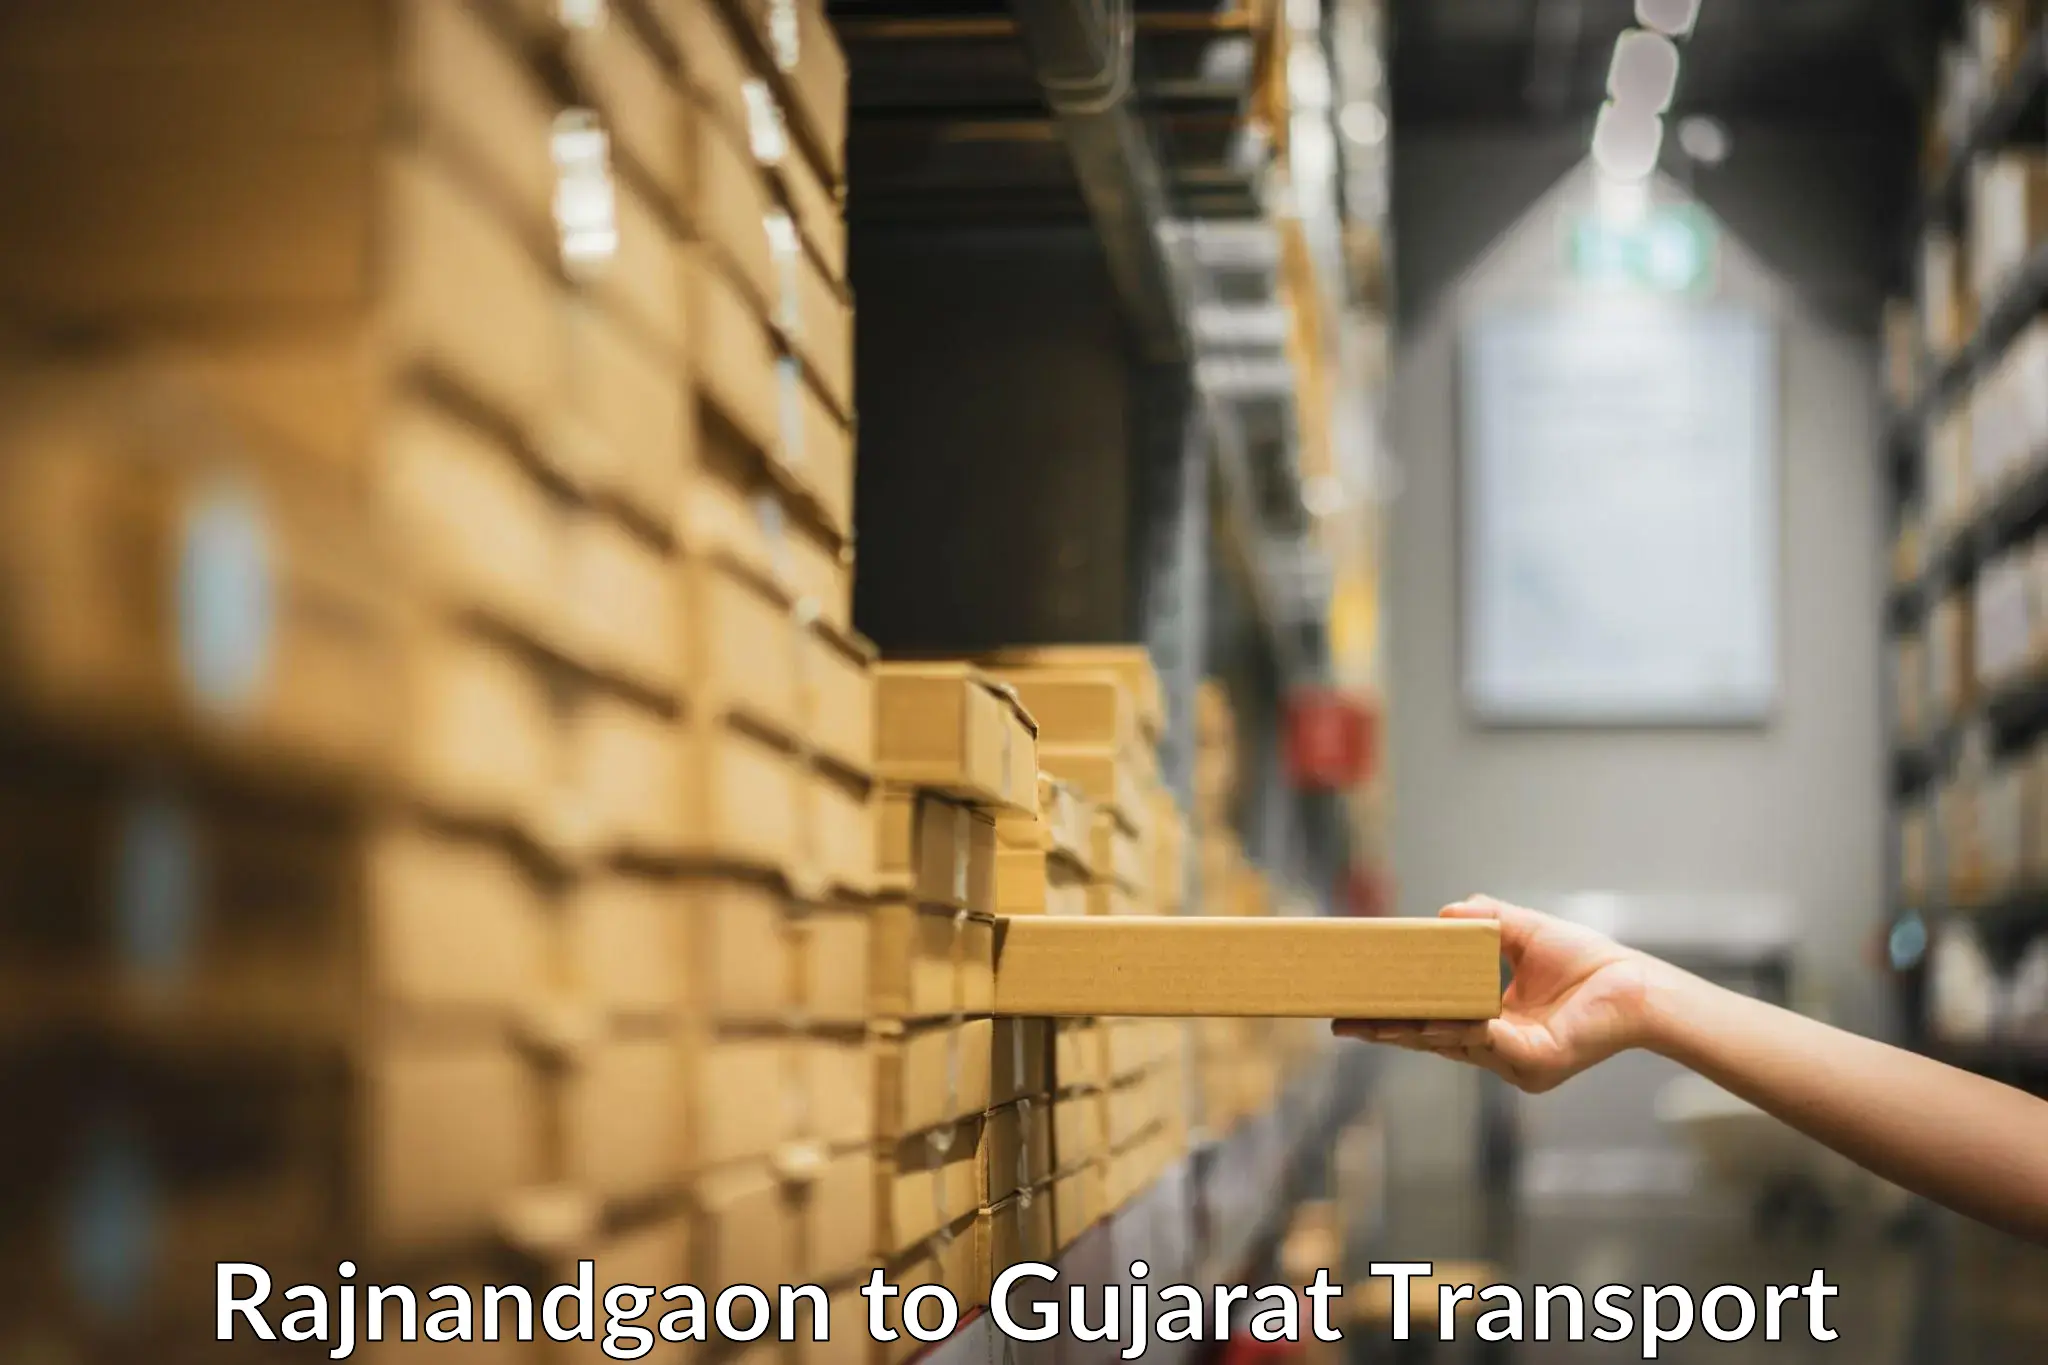 Truck transport companies in India Rajnandgaon to Ankleshwar